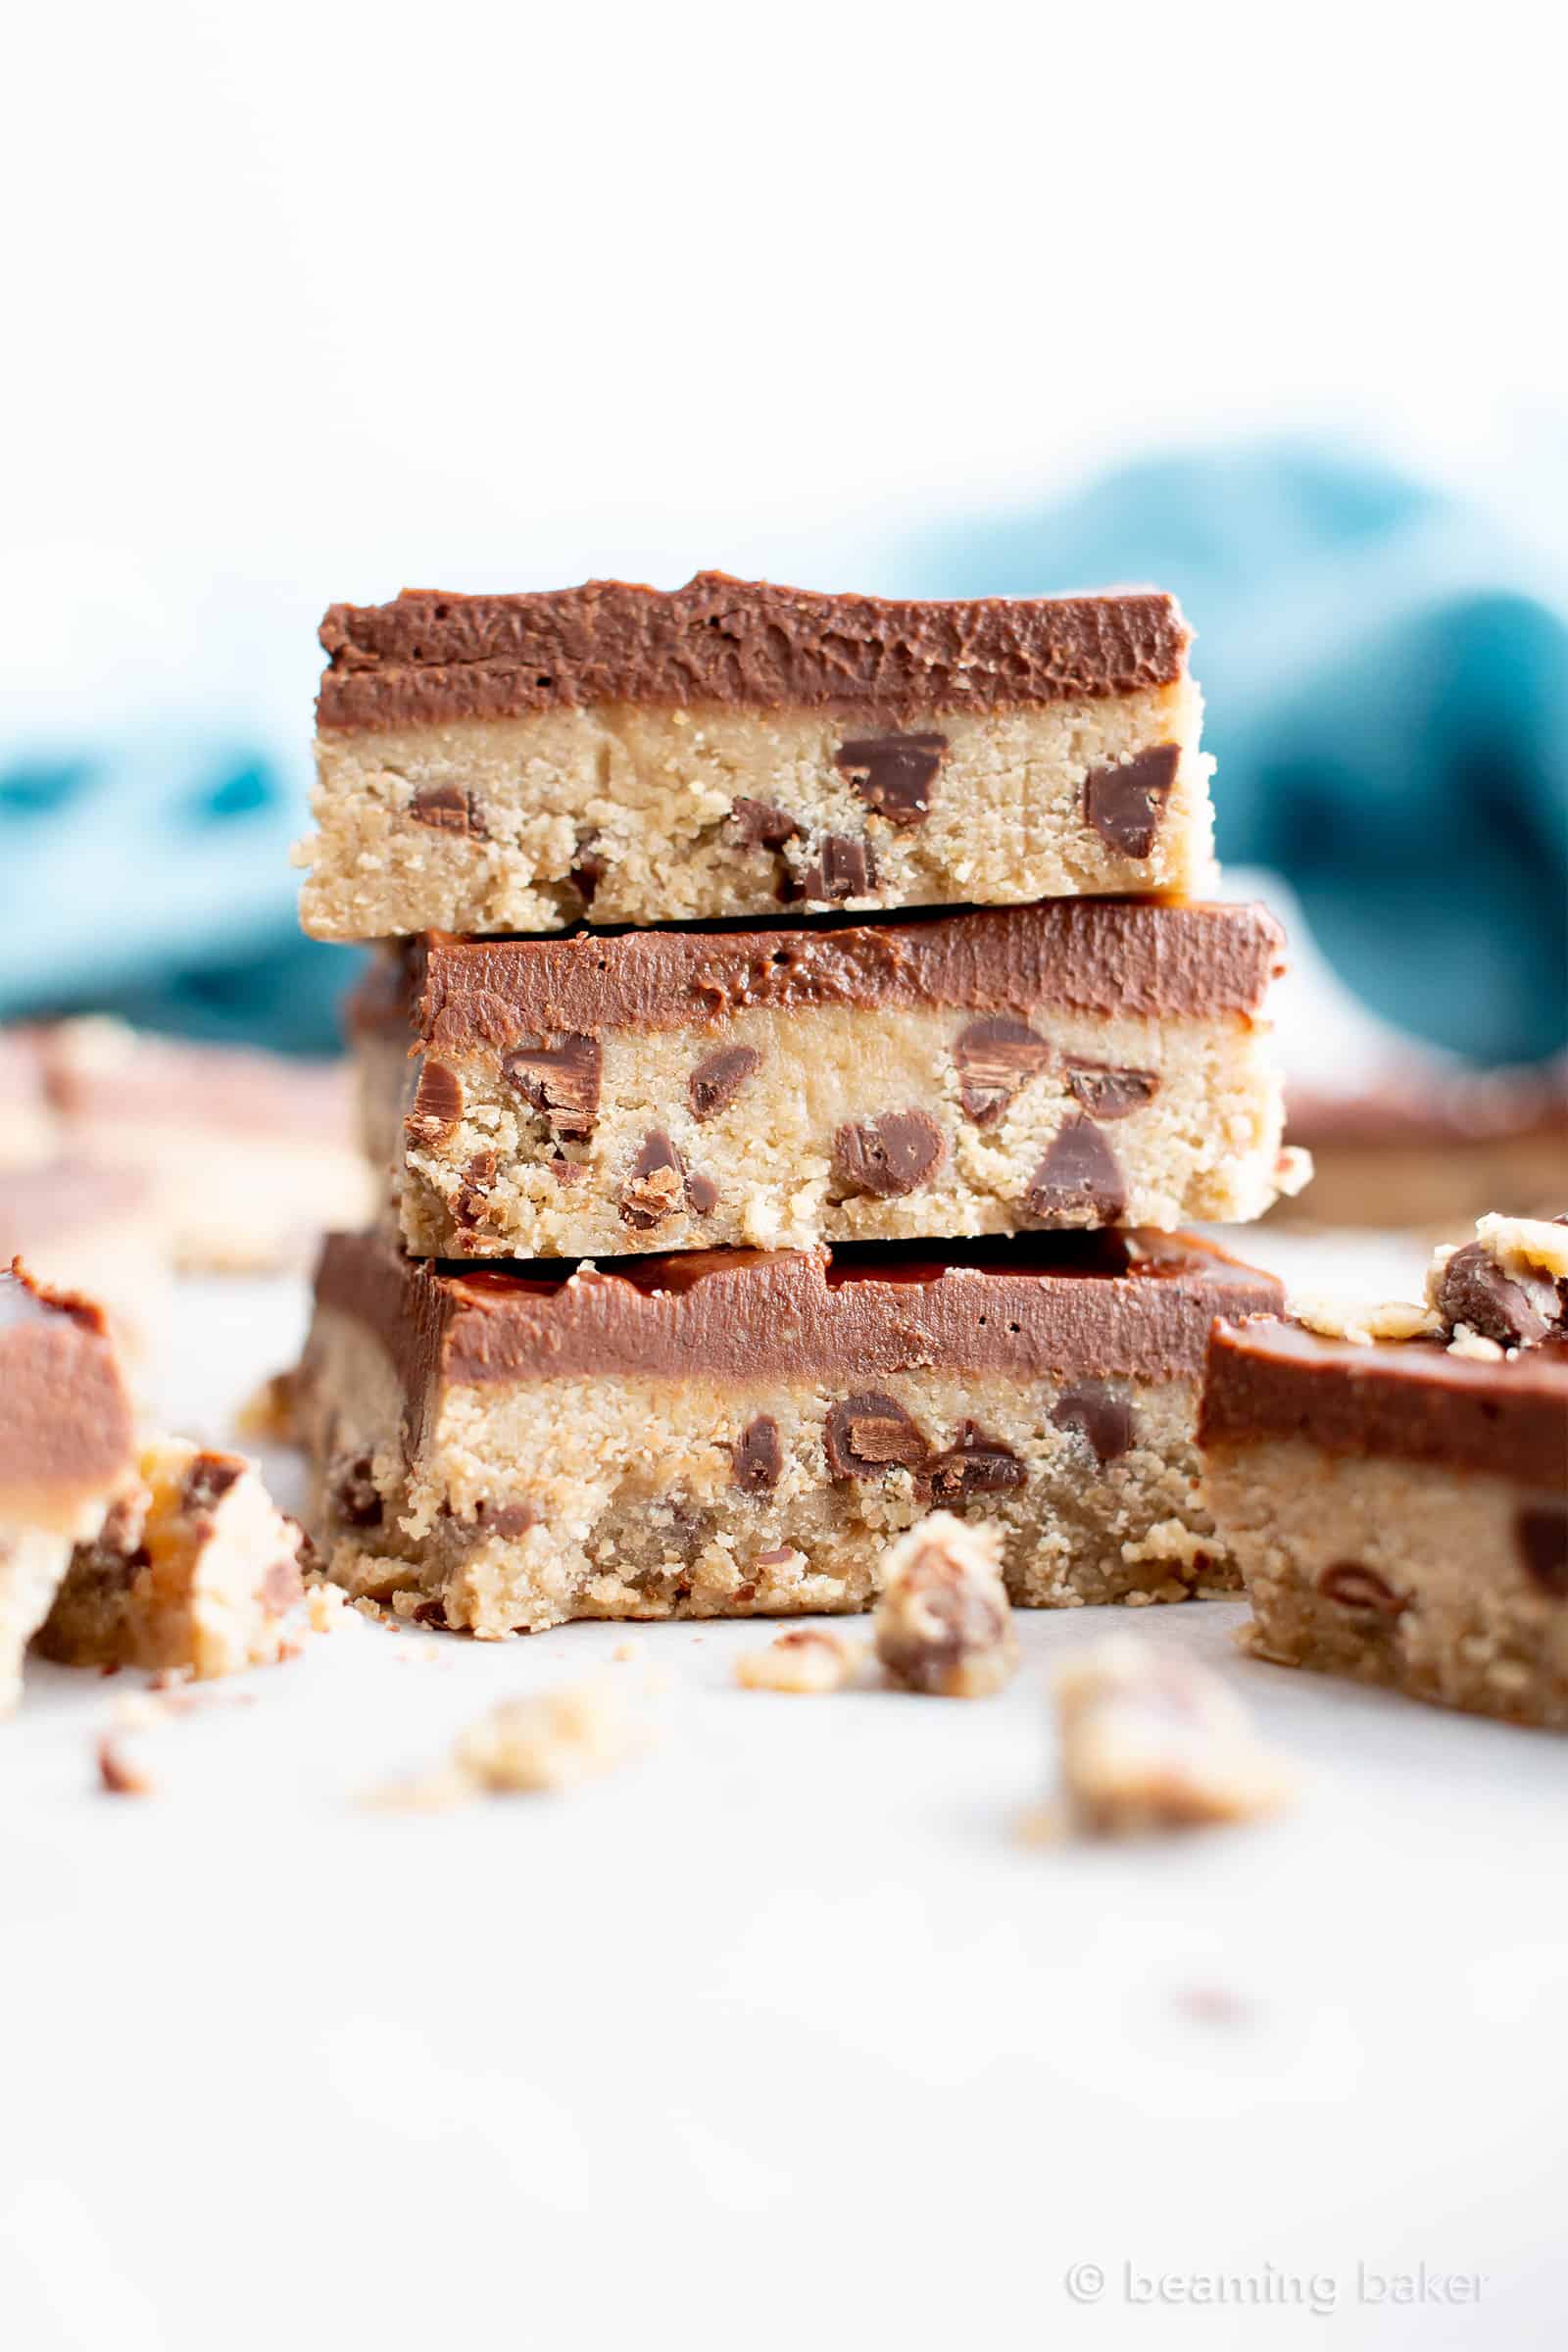 Healthy Gluten Free Cookie Dough Bars (V, GF): an easy, no bake recipe for decadent edible cookie dough bars coated in a thick layer of mouthwatering chocolate topping. Made with healthy, whole ingredients. #Vegan #GlutenFree #CookieDough #HealthyDesserts #NoBake #GlutenFreeVegan #BeamingBaker | Recipe at BeamingBaker.com